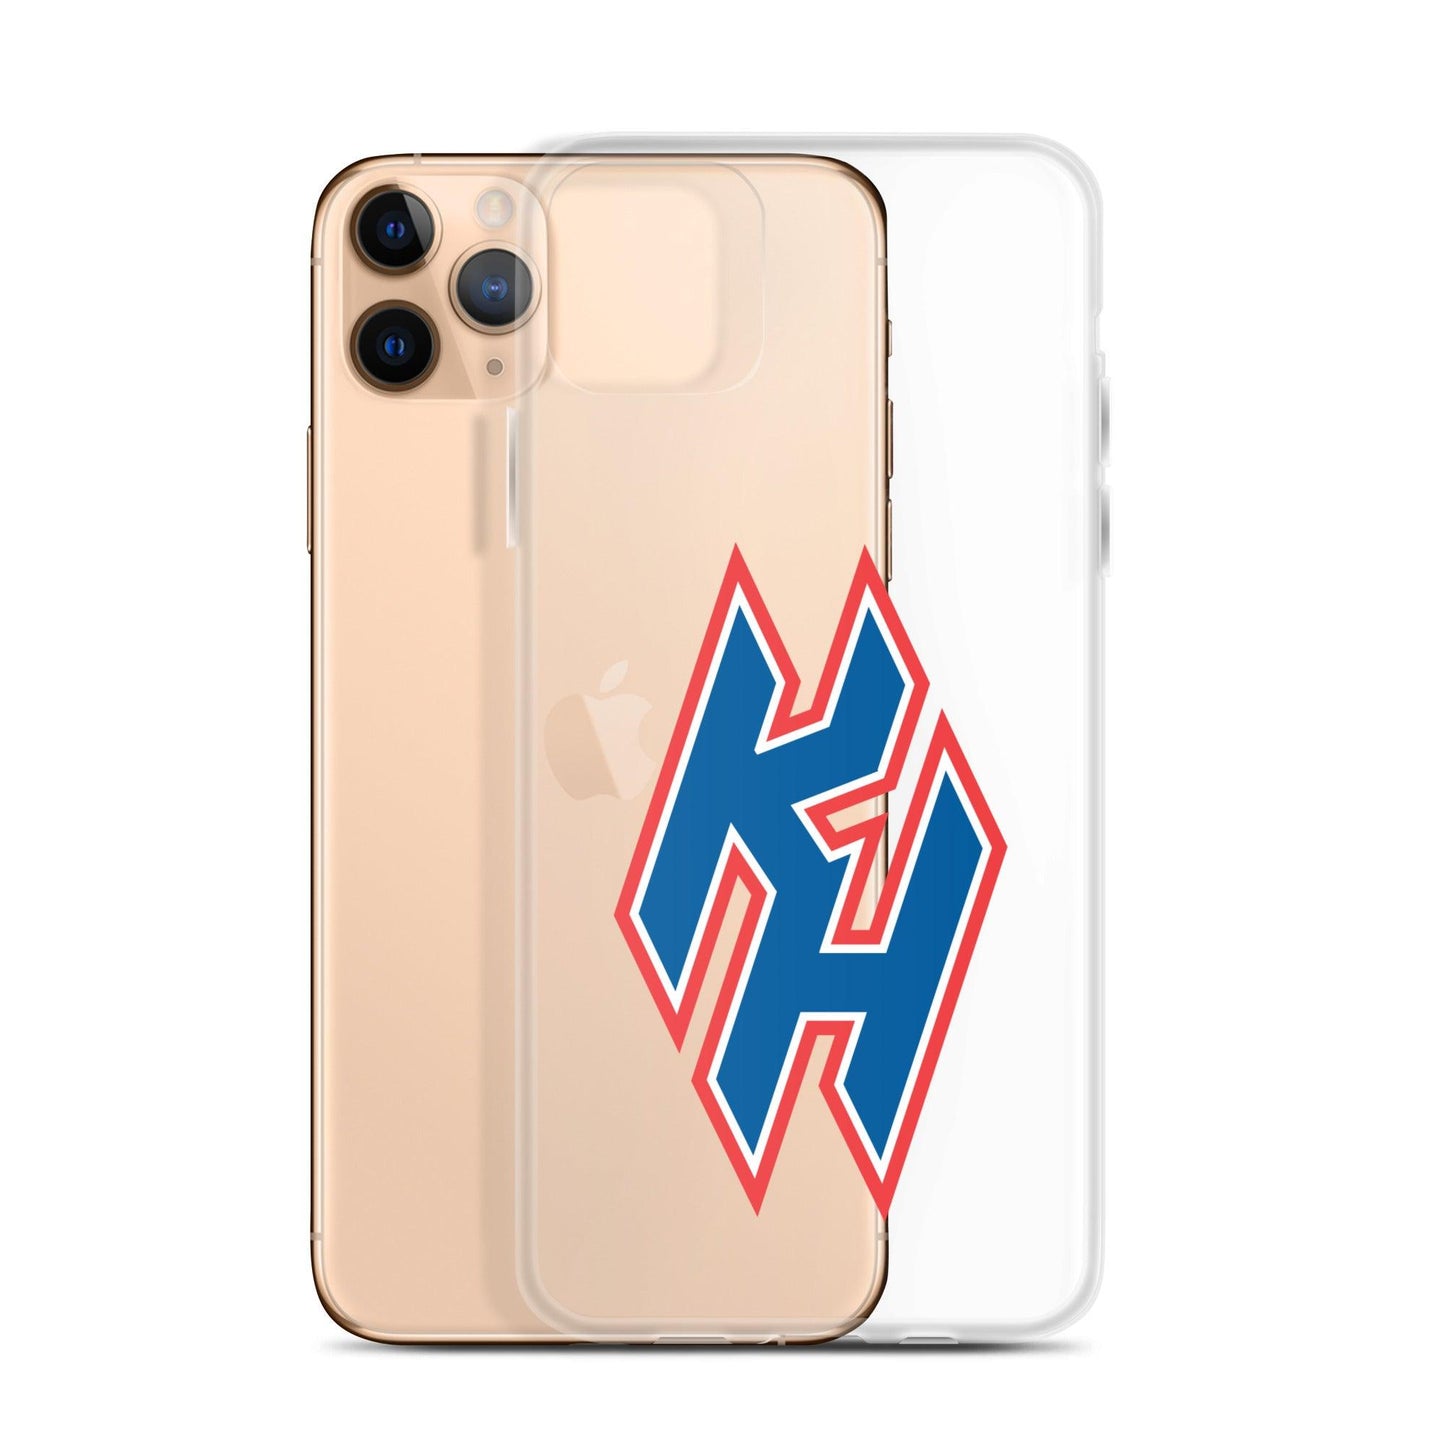 Kody Hoese "Essential" iPhone Case - Fan Arch